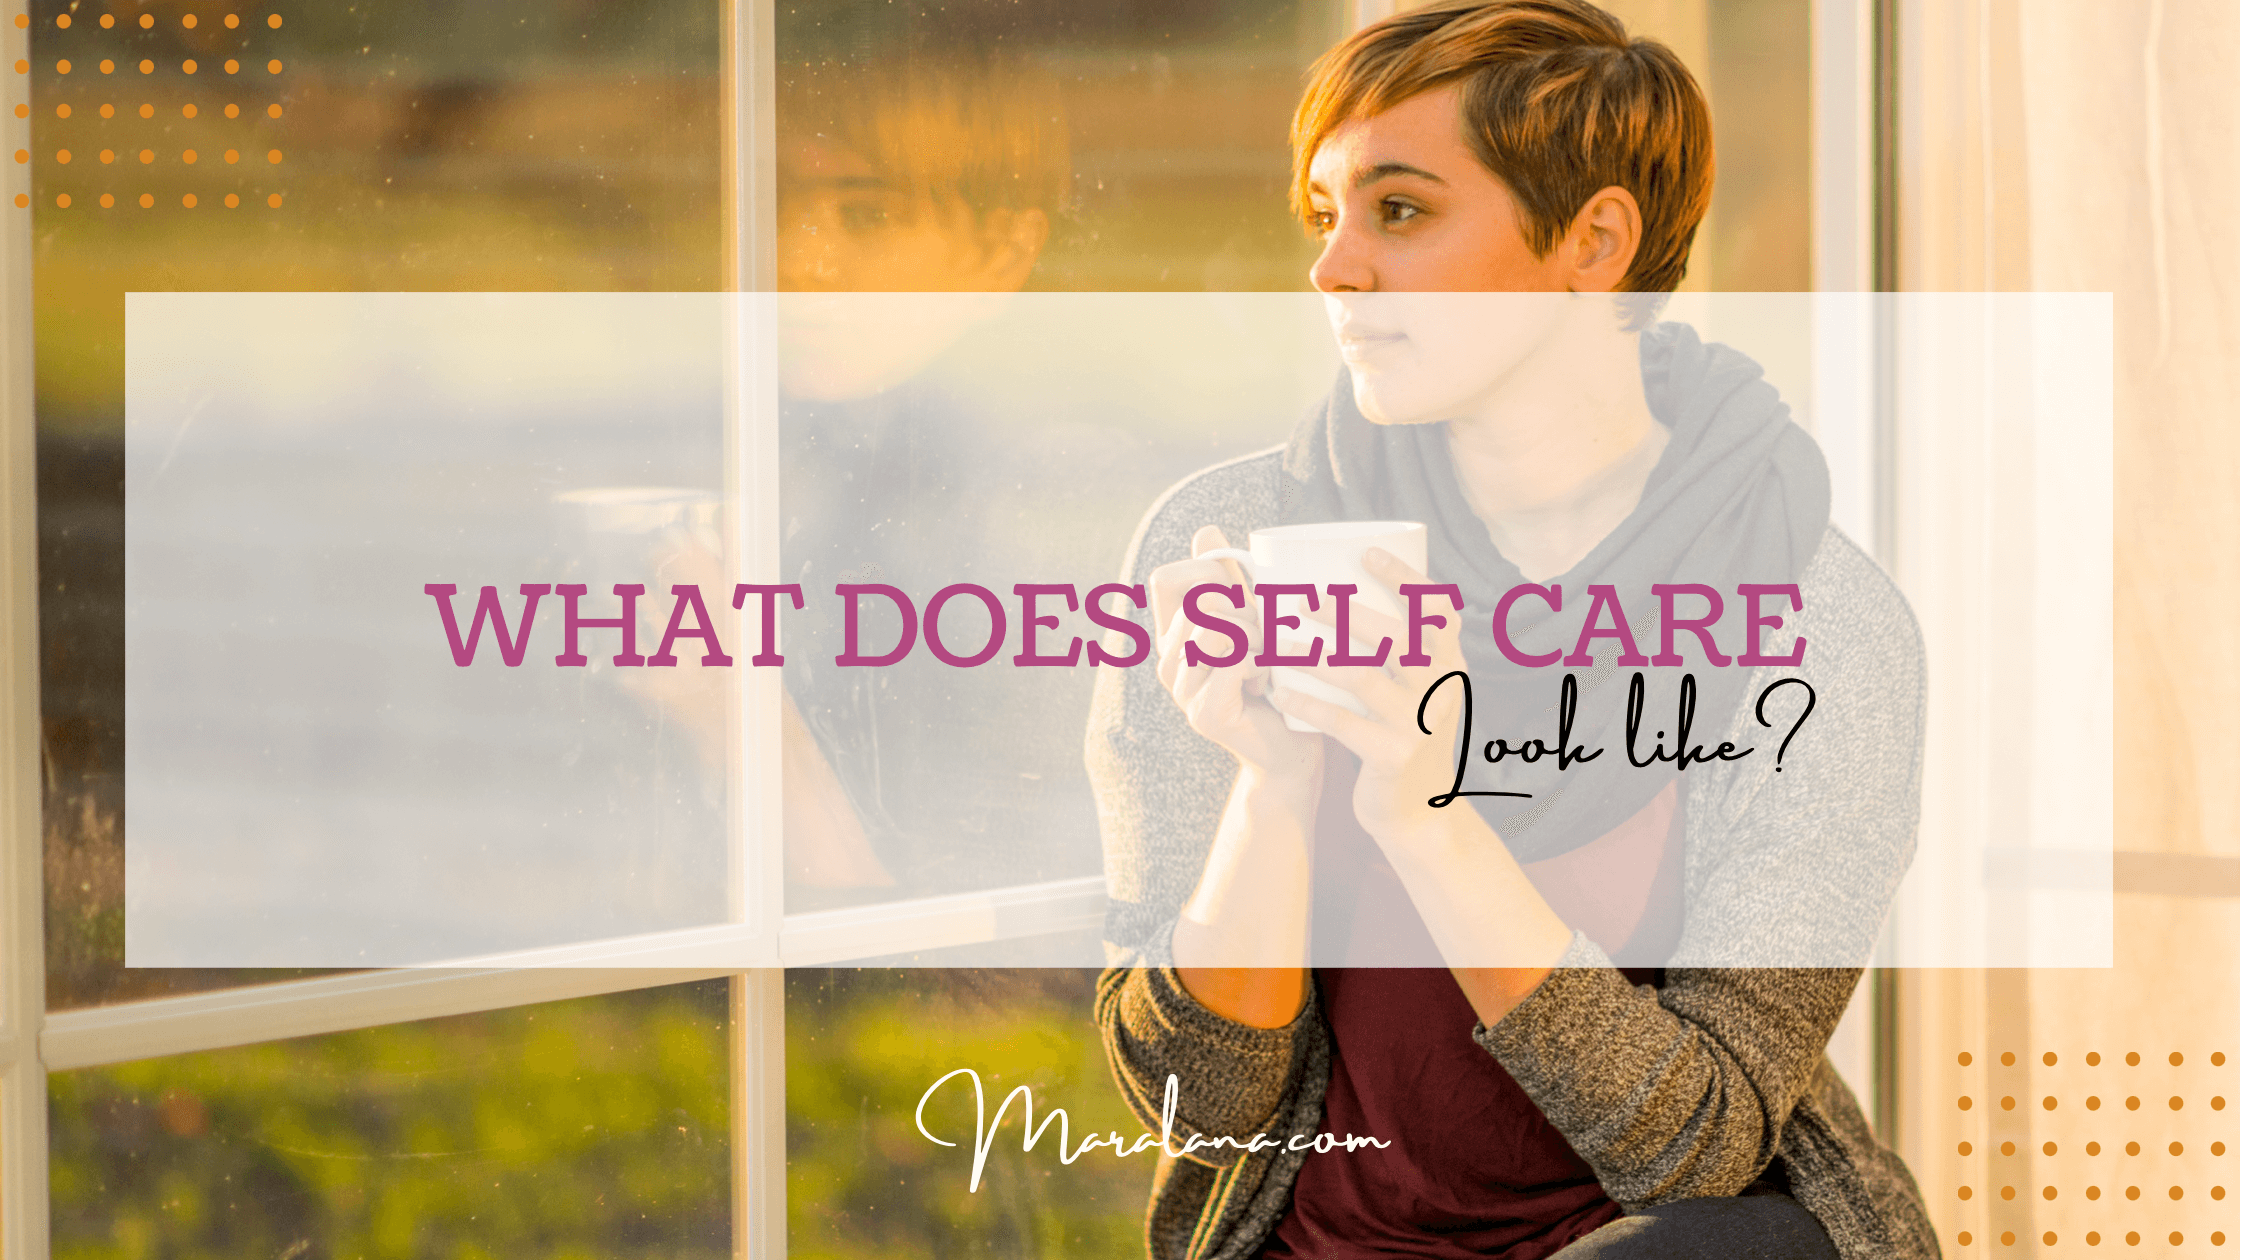 What does self care look like?